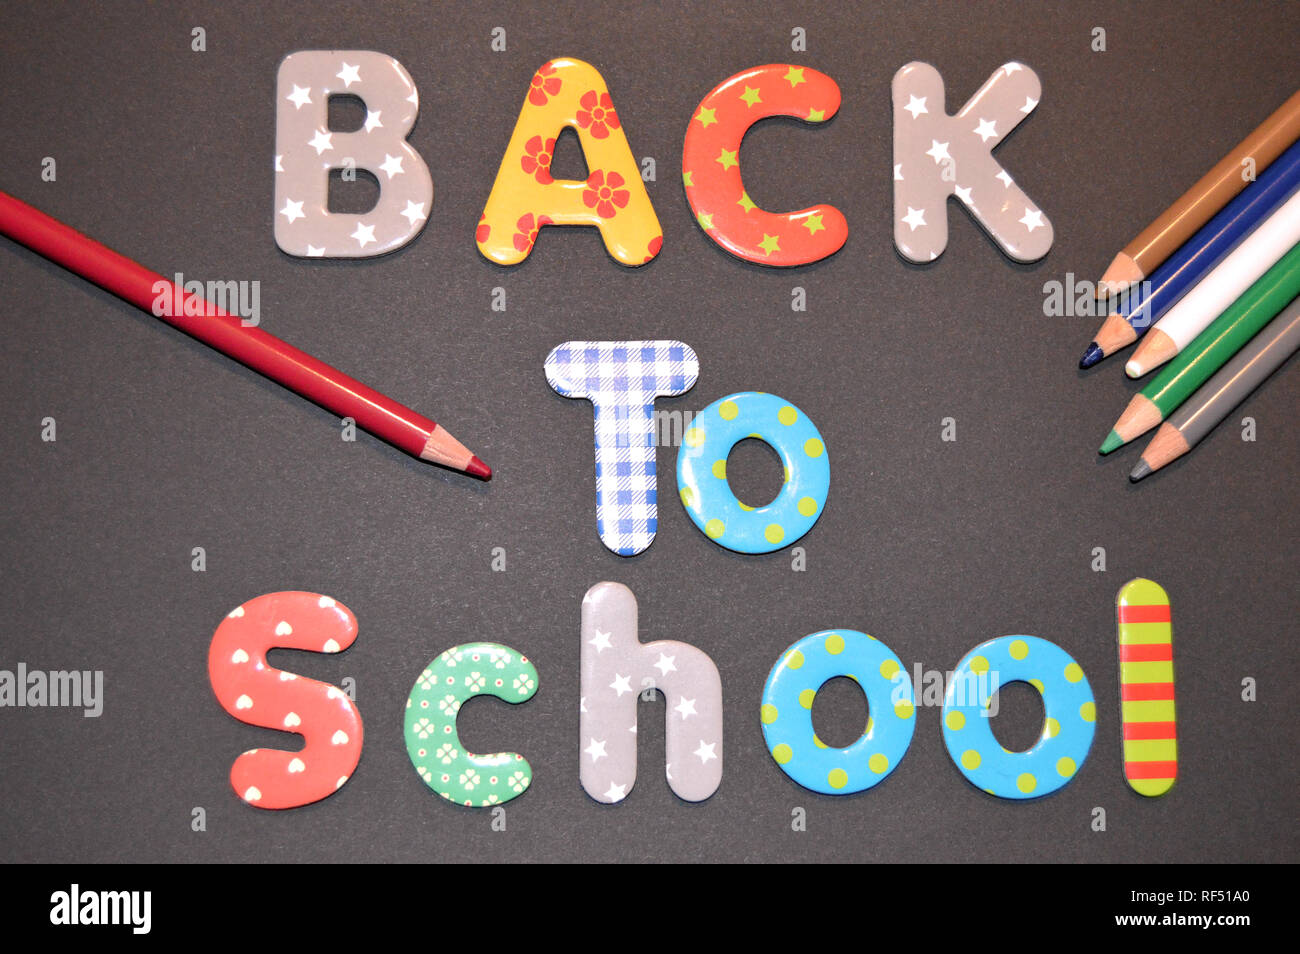 Illustration of the back to school with letters and colored pencils Stock Photo